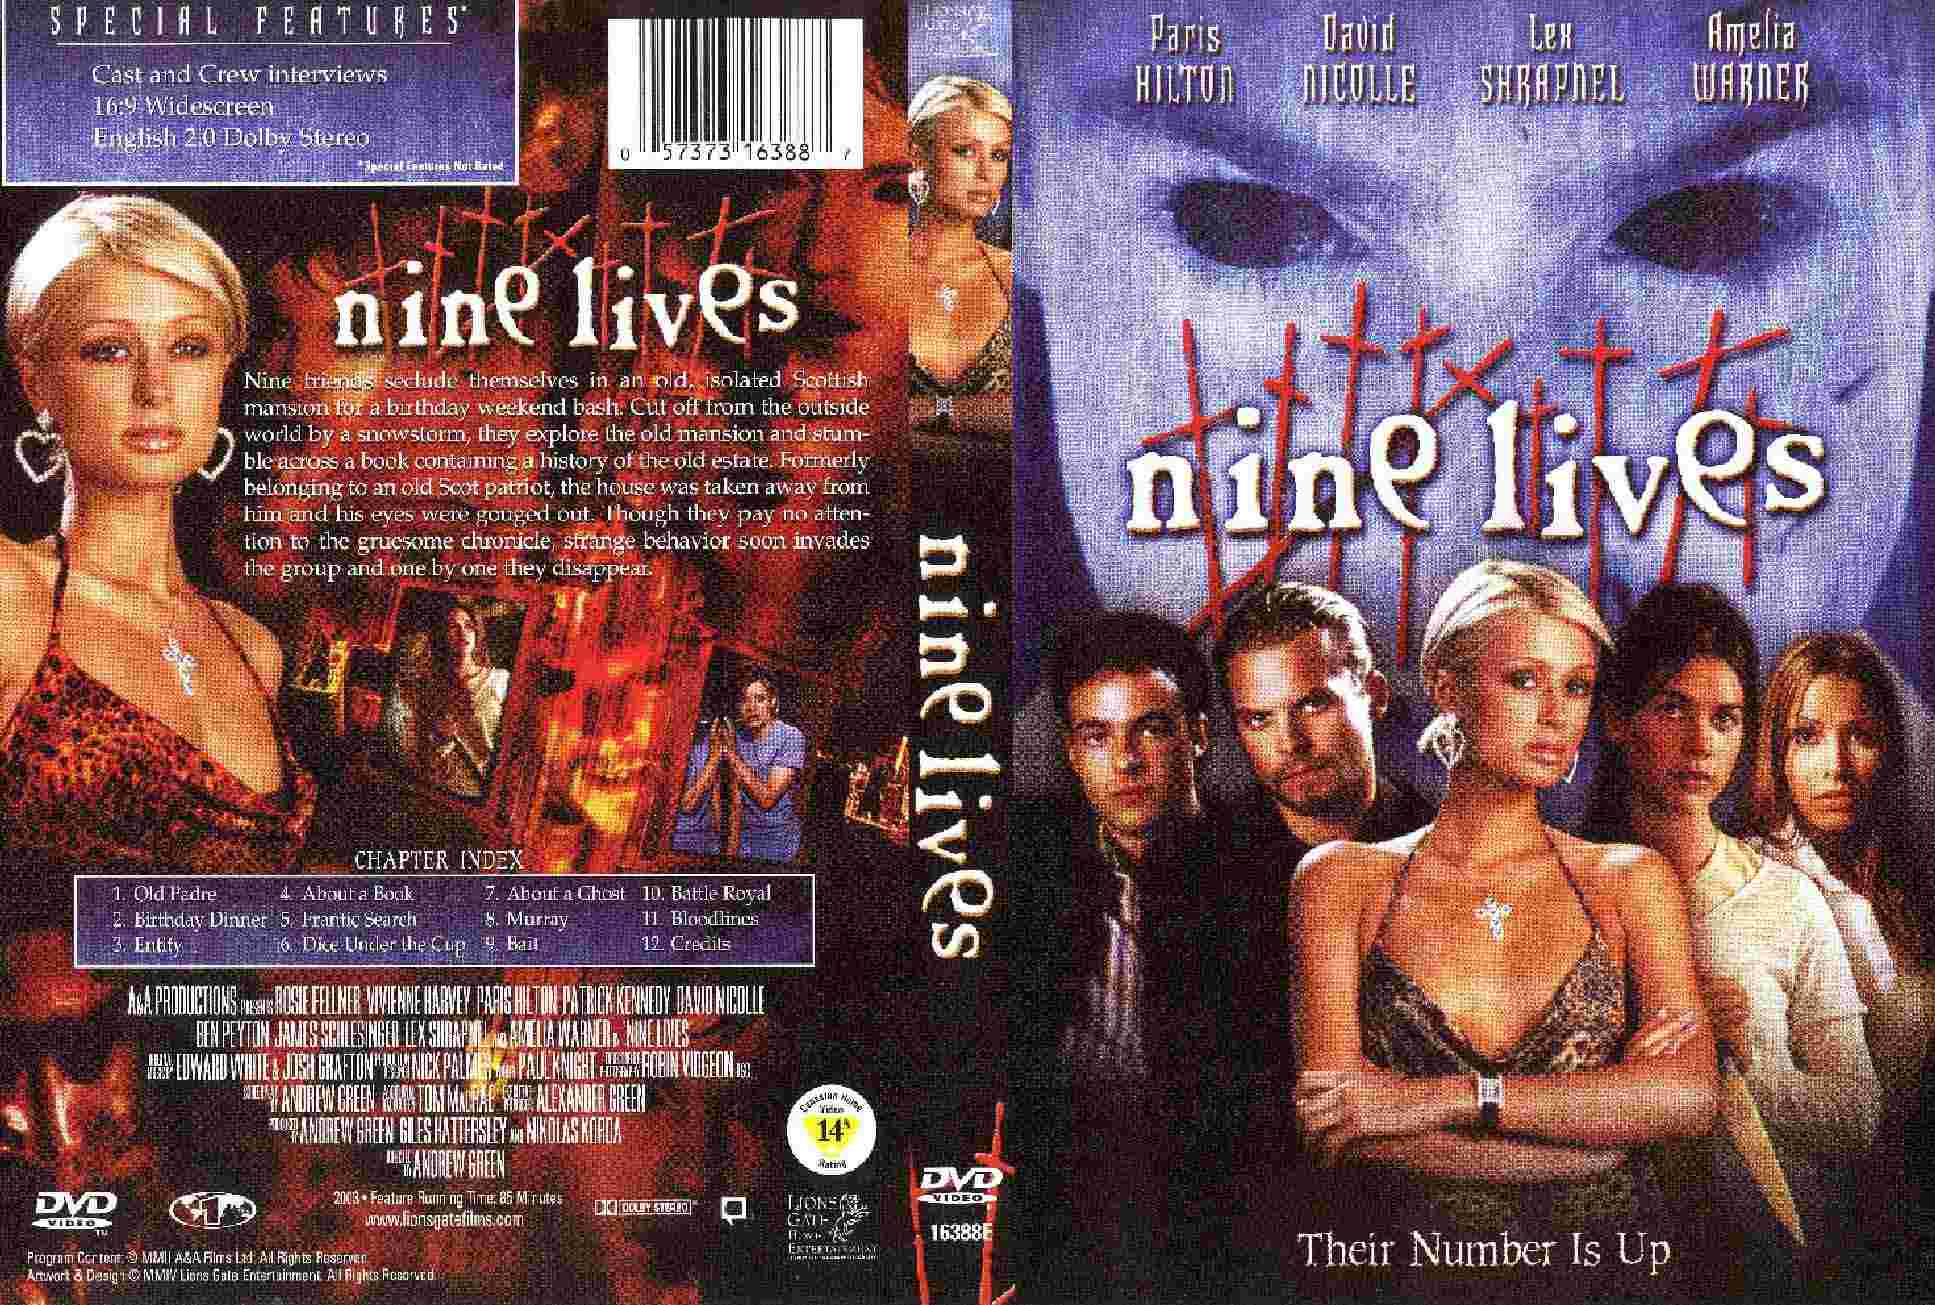 'Nine Lives' this was real horror, Paris Hilton at her worst. Production design by Nick Palmer.